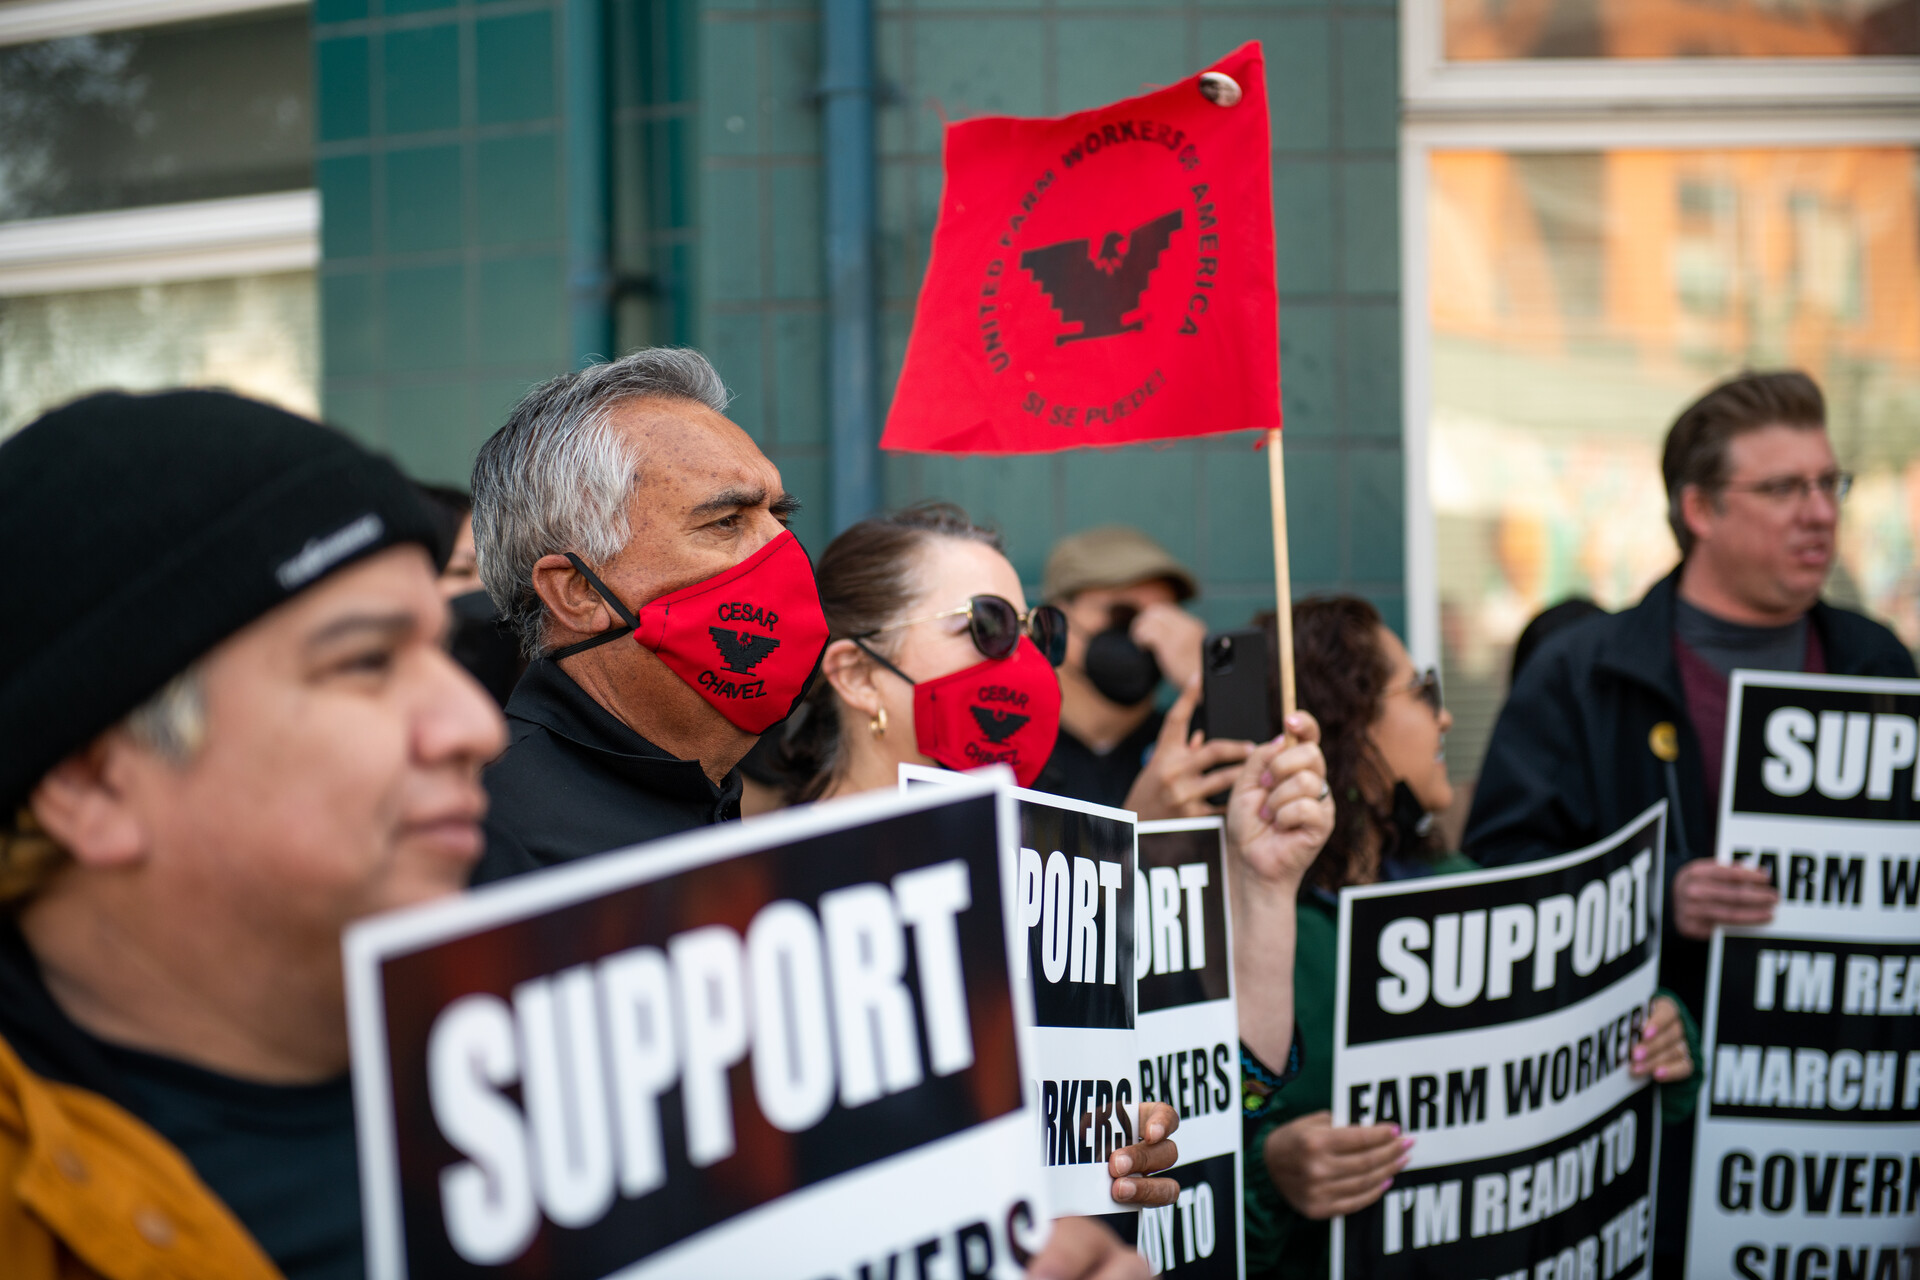 A man and a woman in focus amid other demonstrators, slightly blurred, wear red facemasks reading 'Cesar Chavez' in black with the black UFW phoenix symbol, and hold signs black-and-white signs reading 'Support Farm Workers: I'm ready to march for the governor's signature.'